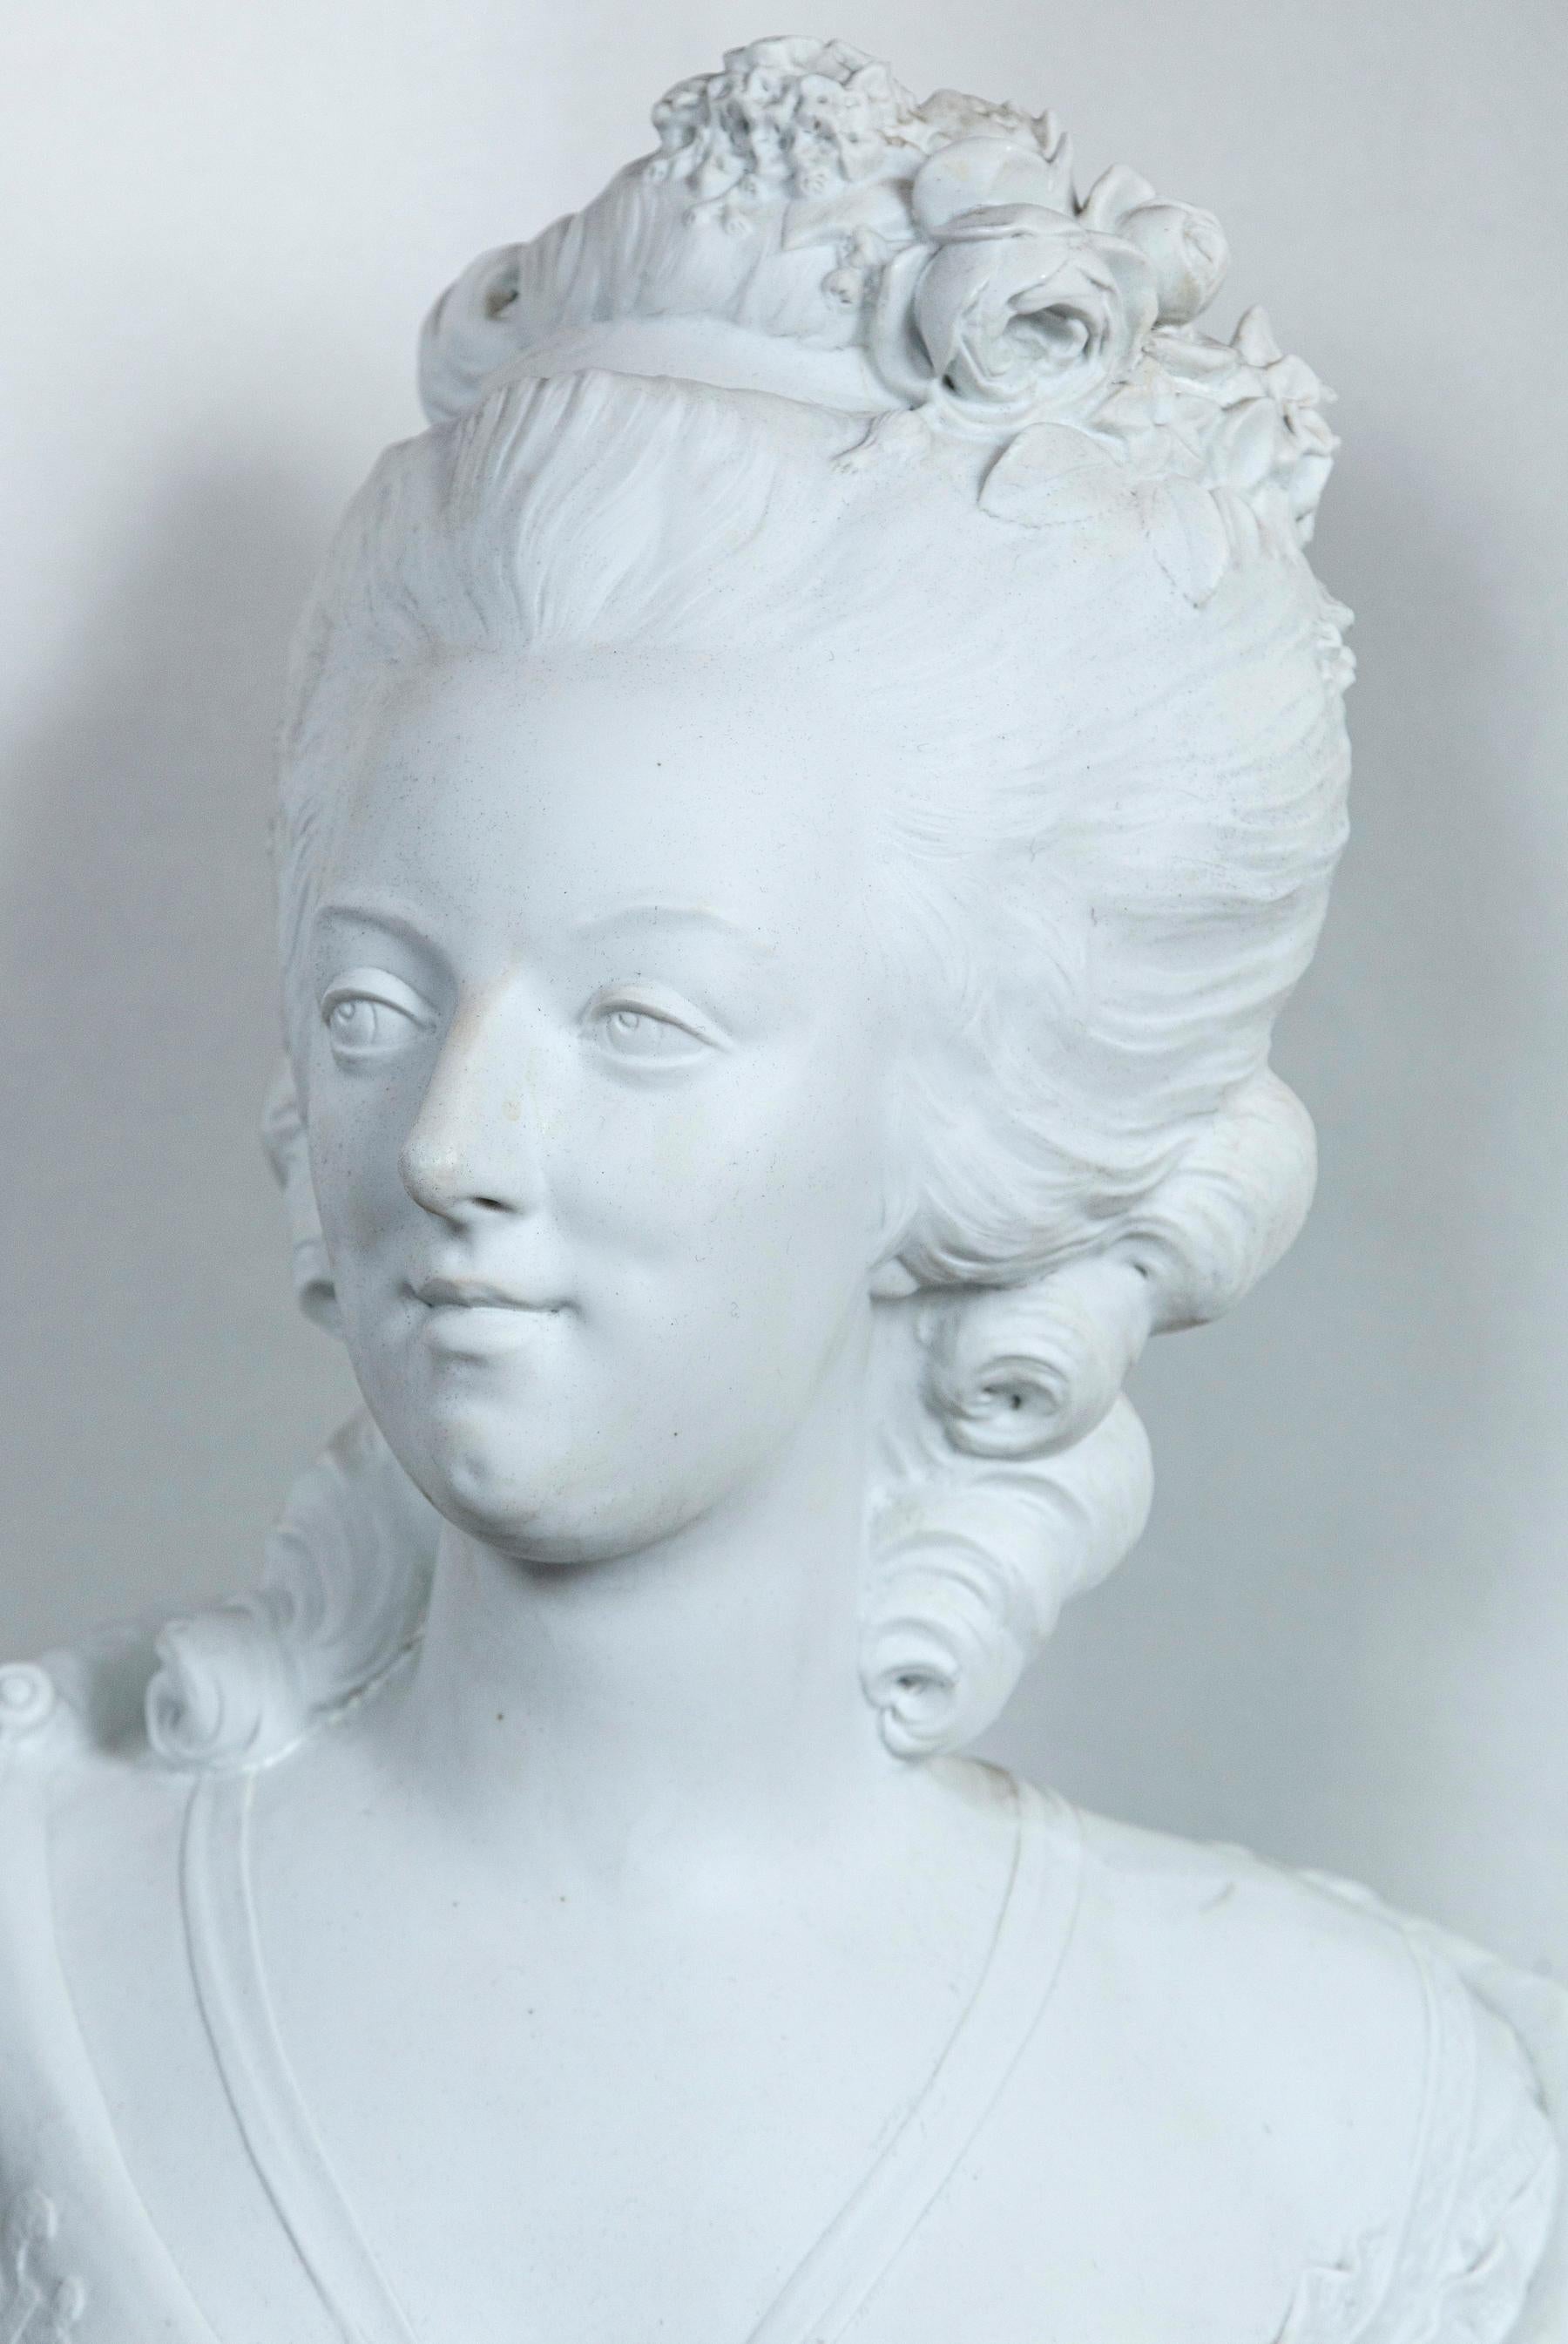 Signed across the back Lecomte (Felix Lecomte 1737-1817)
Bright white unglazed porcelain. Raised on a integral base that is 6.5 x 6.5
Her hair in the style of the late 18th century. From a ribbon around her neck hangs a profile pendant of King